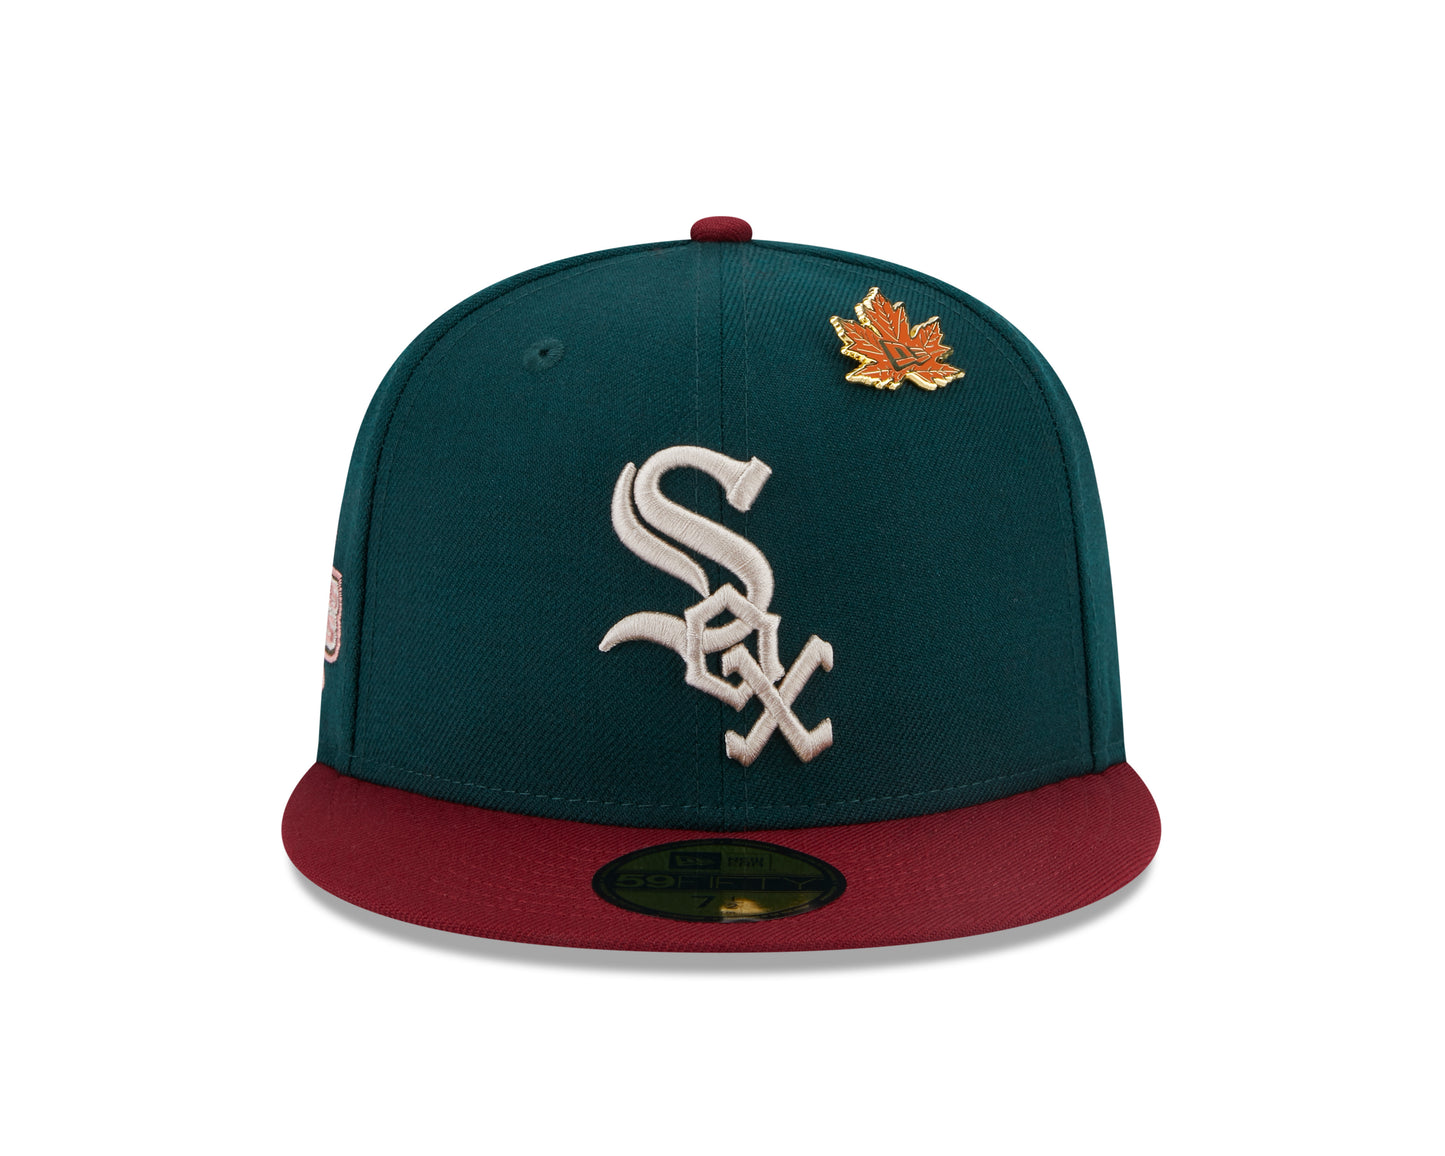 New Era - MLB WS Contrast 59Fifty Fitted - Chicago White Sox - Green/Red - Headz Up 